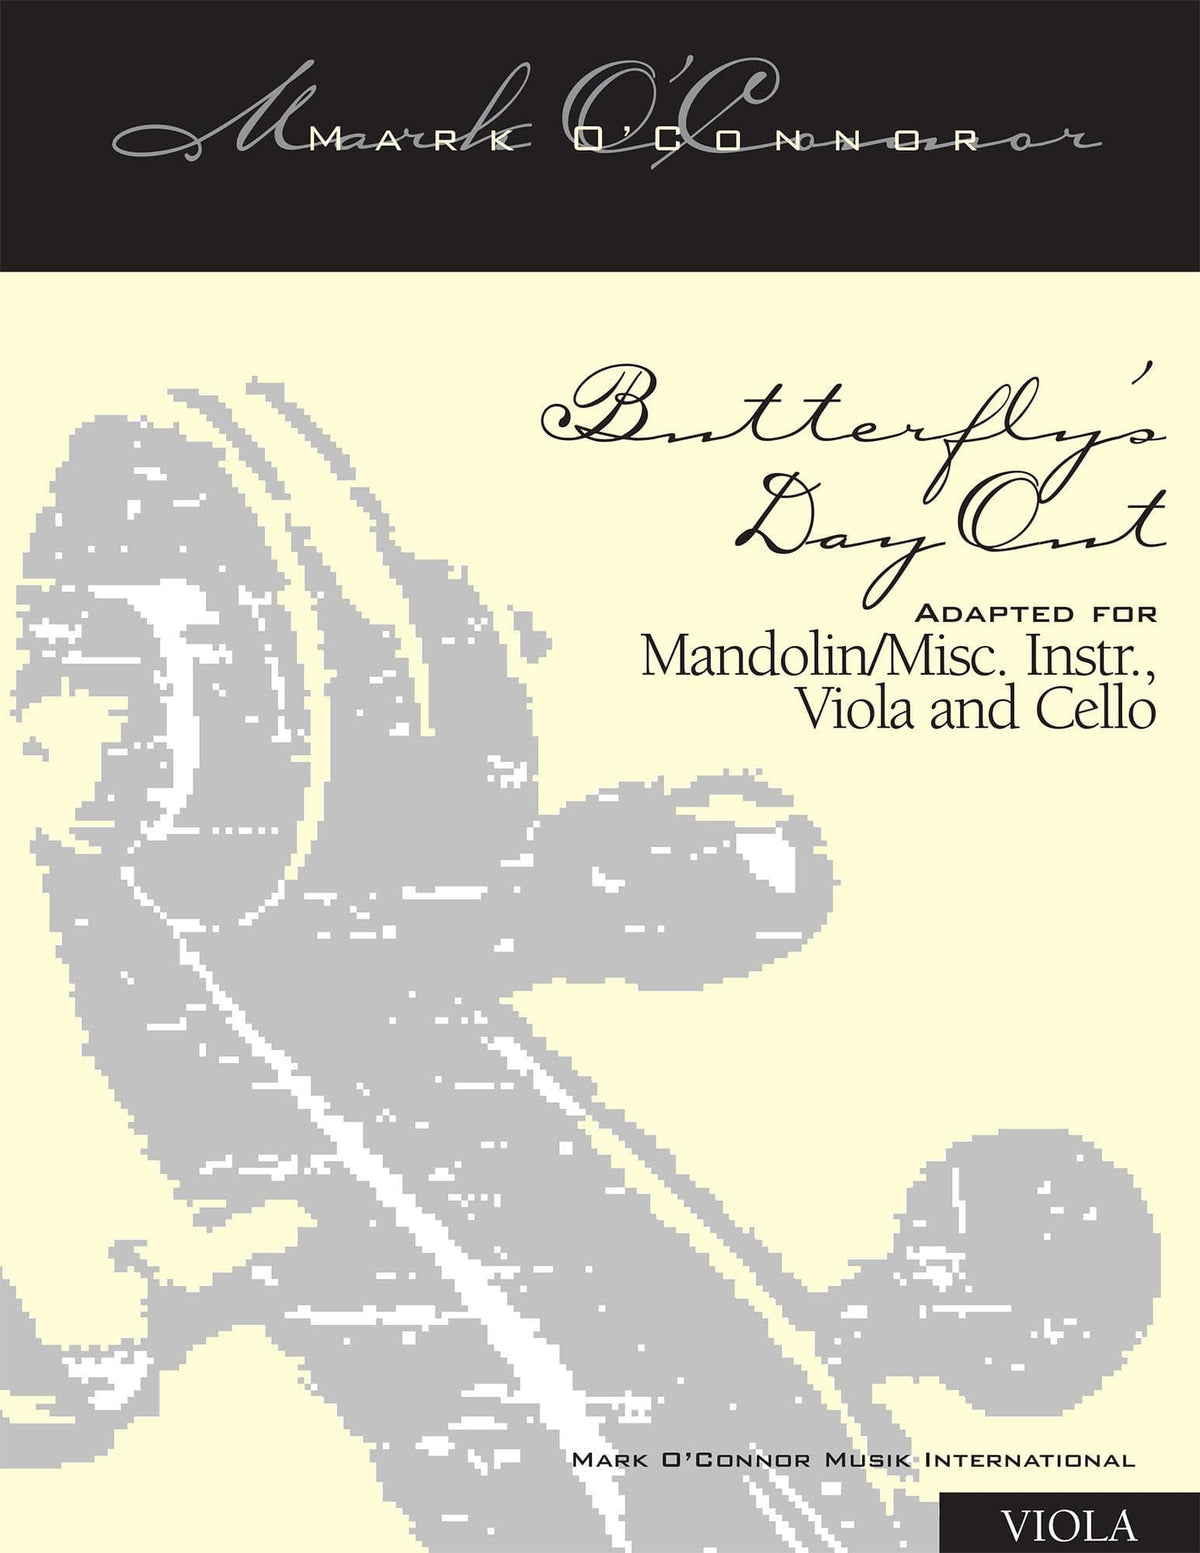 O'Connor, Mark - Butterfly's Day Out for Mandolin, Viola, Cello - Viola - Digital Download